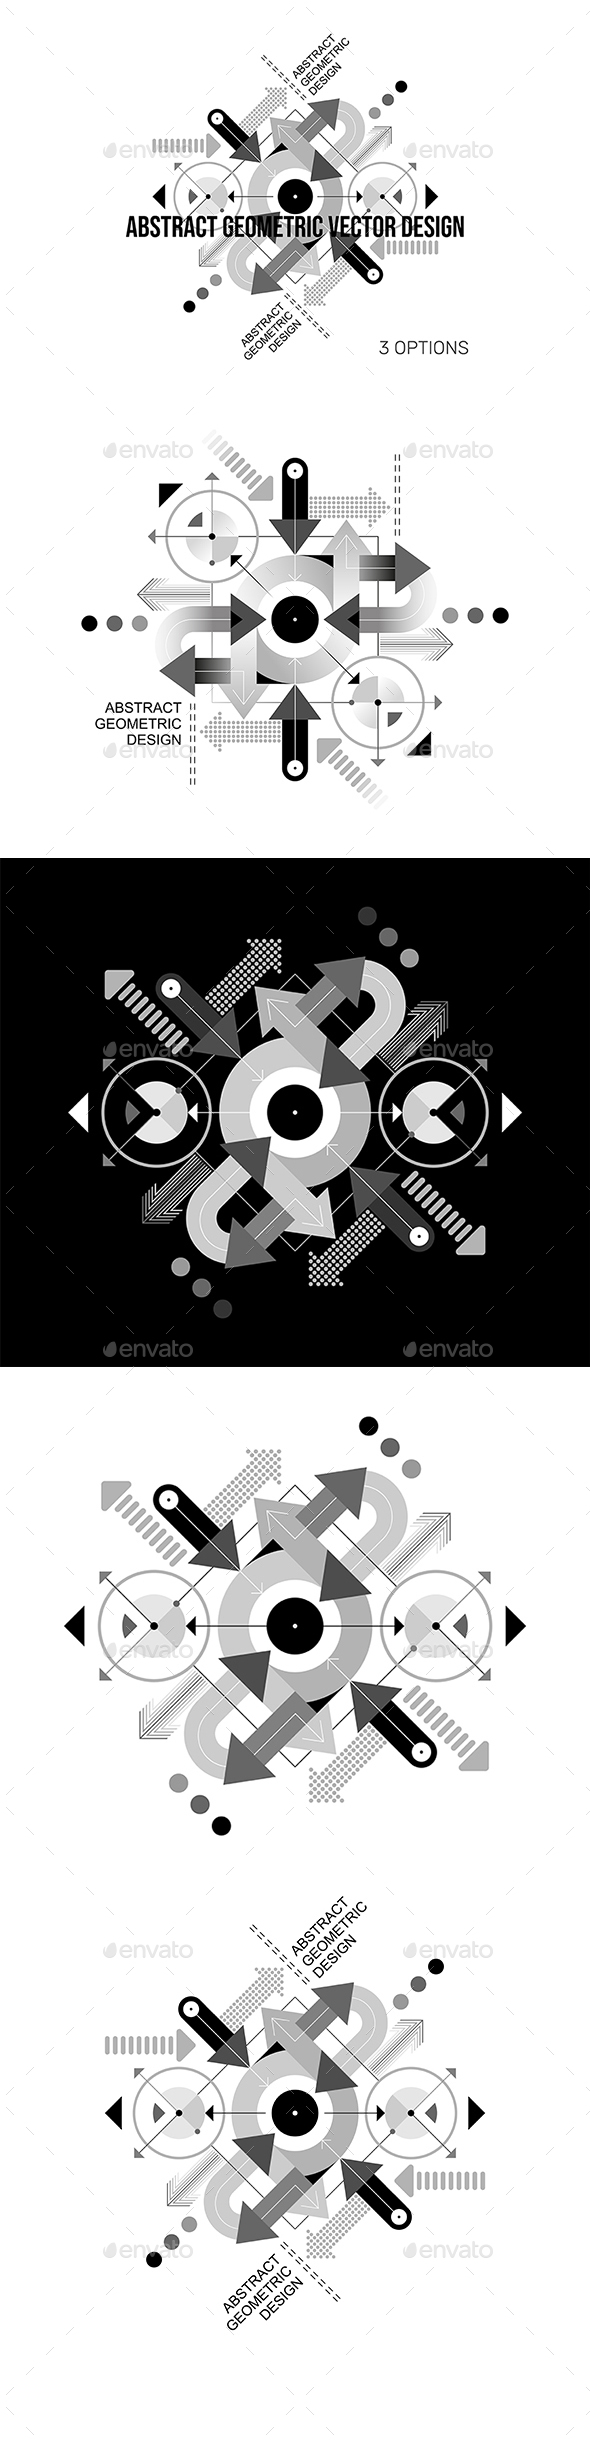 [DOWNLOAD]Greyscale Abstract Geometric Vector Design